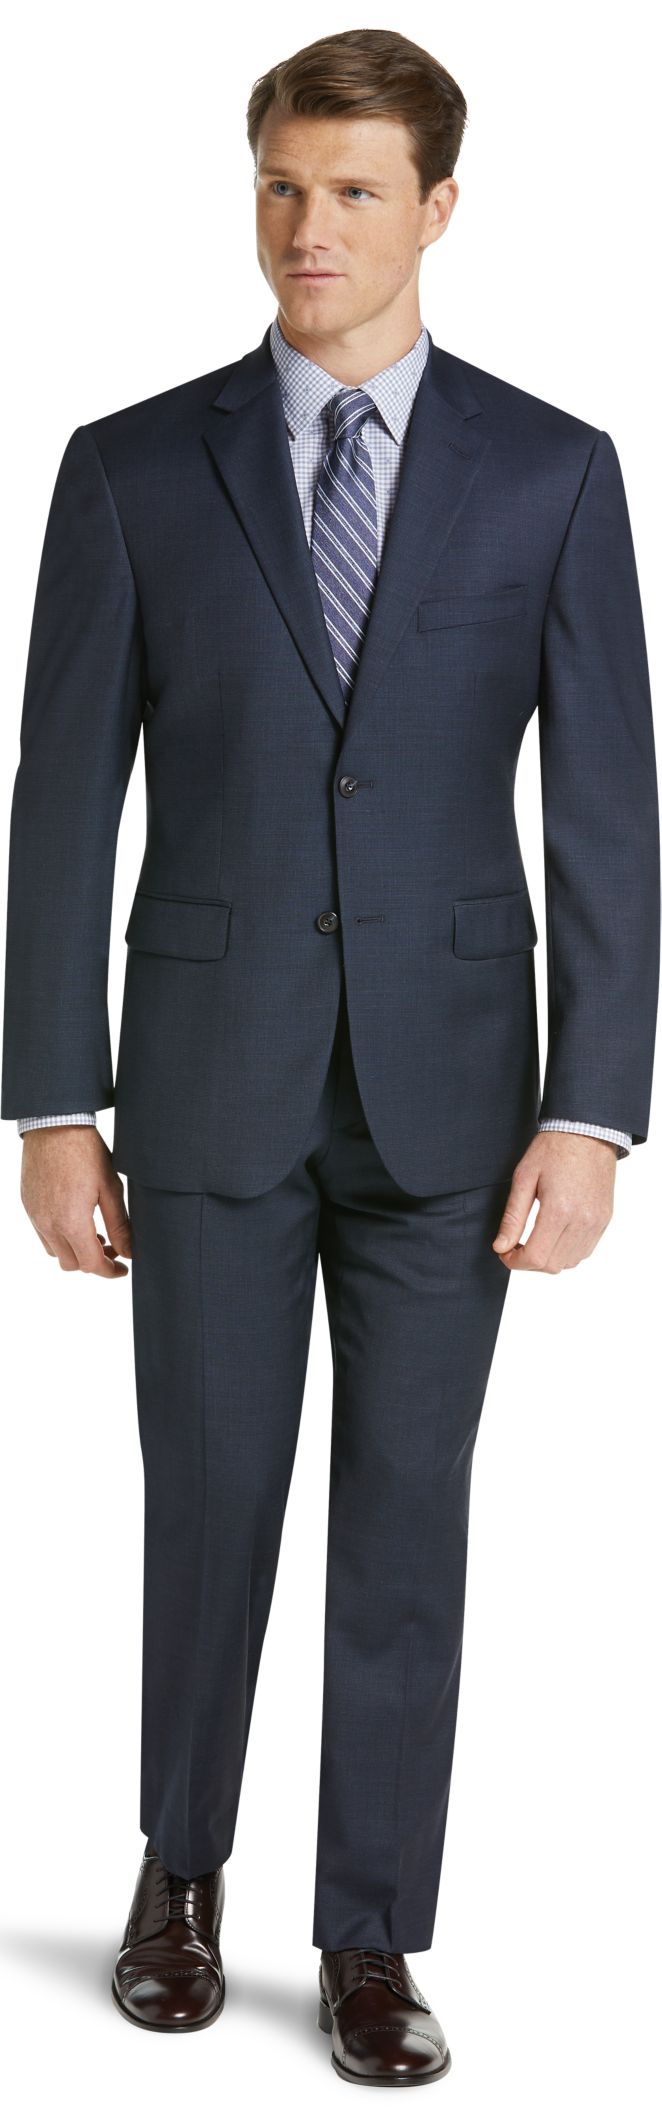 JoS. A. Bank Men's 1905 Collection Tailored Fit Suit Separate